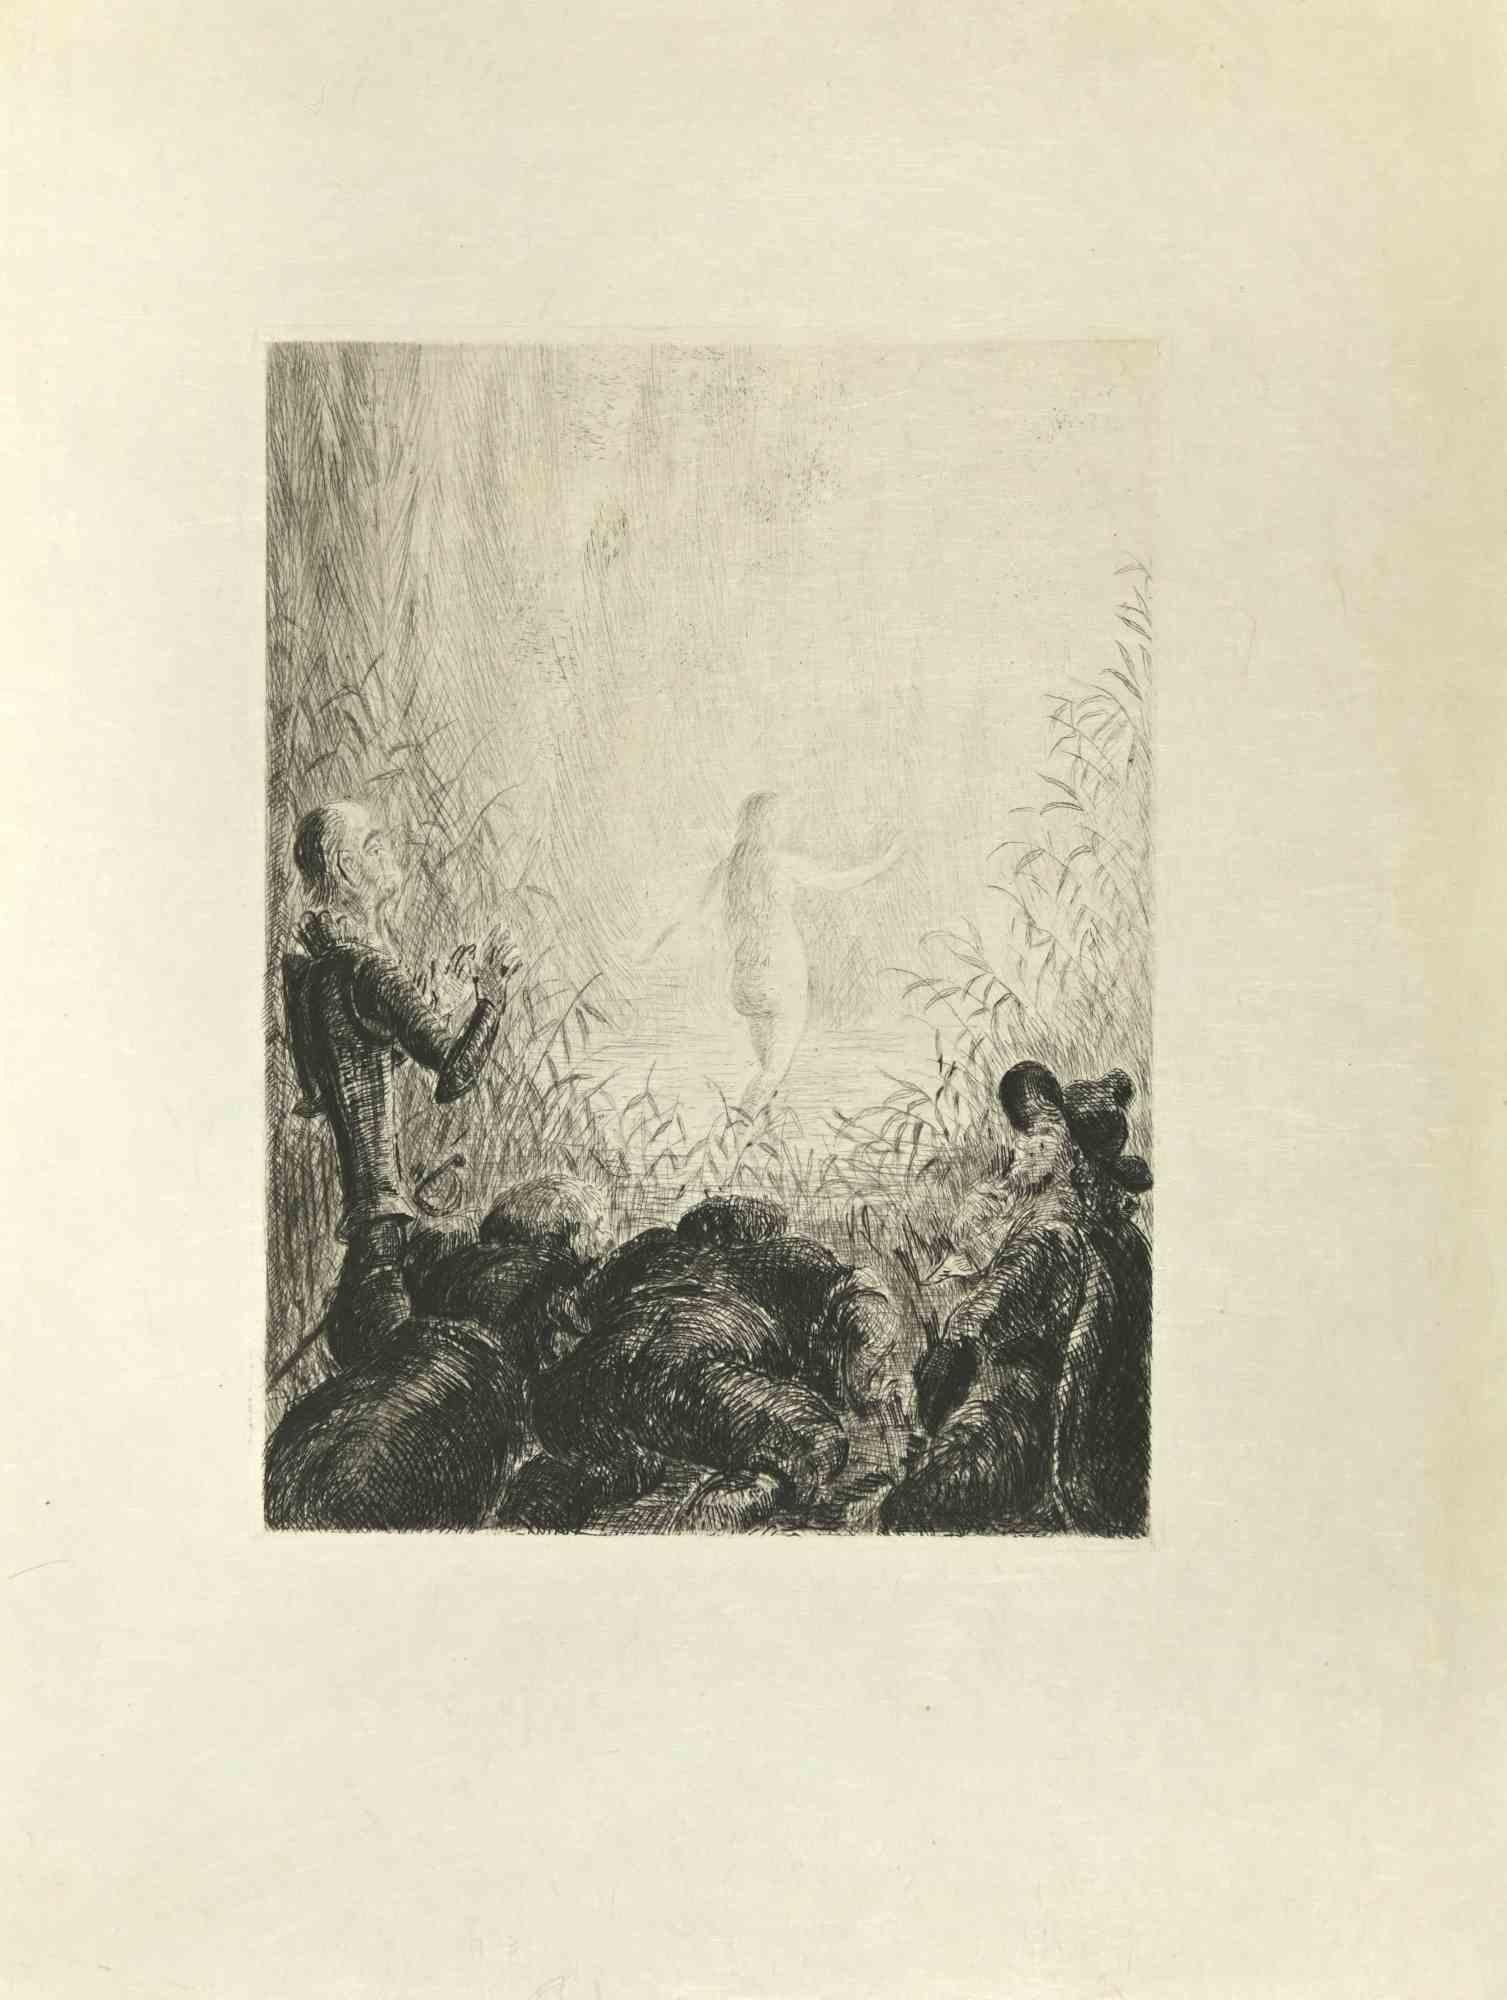 Don Quixote Watching Nude is an etching and drypoint print on ivory-colored Japanese paper, realized by Wladyslaw Jahl in 1951.

It belongs to a limited edition of 125 specimens.

Good conditions.

The artwork represents a visual scene from Don